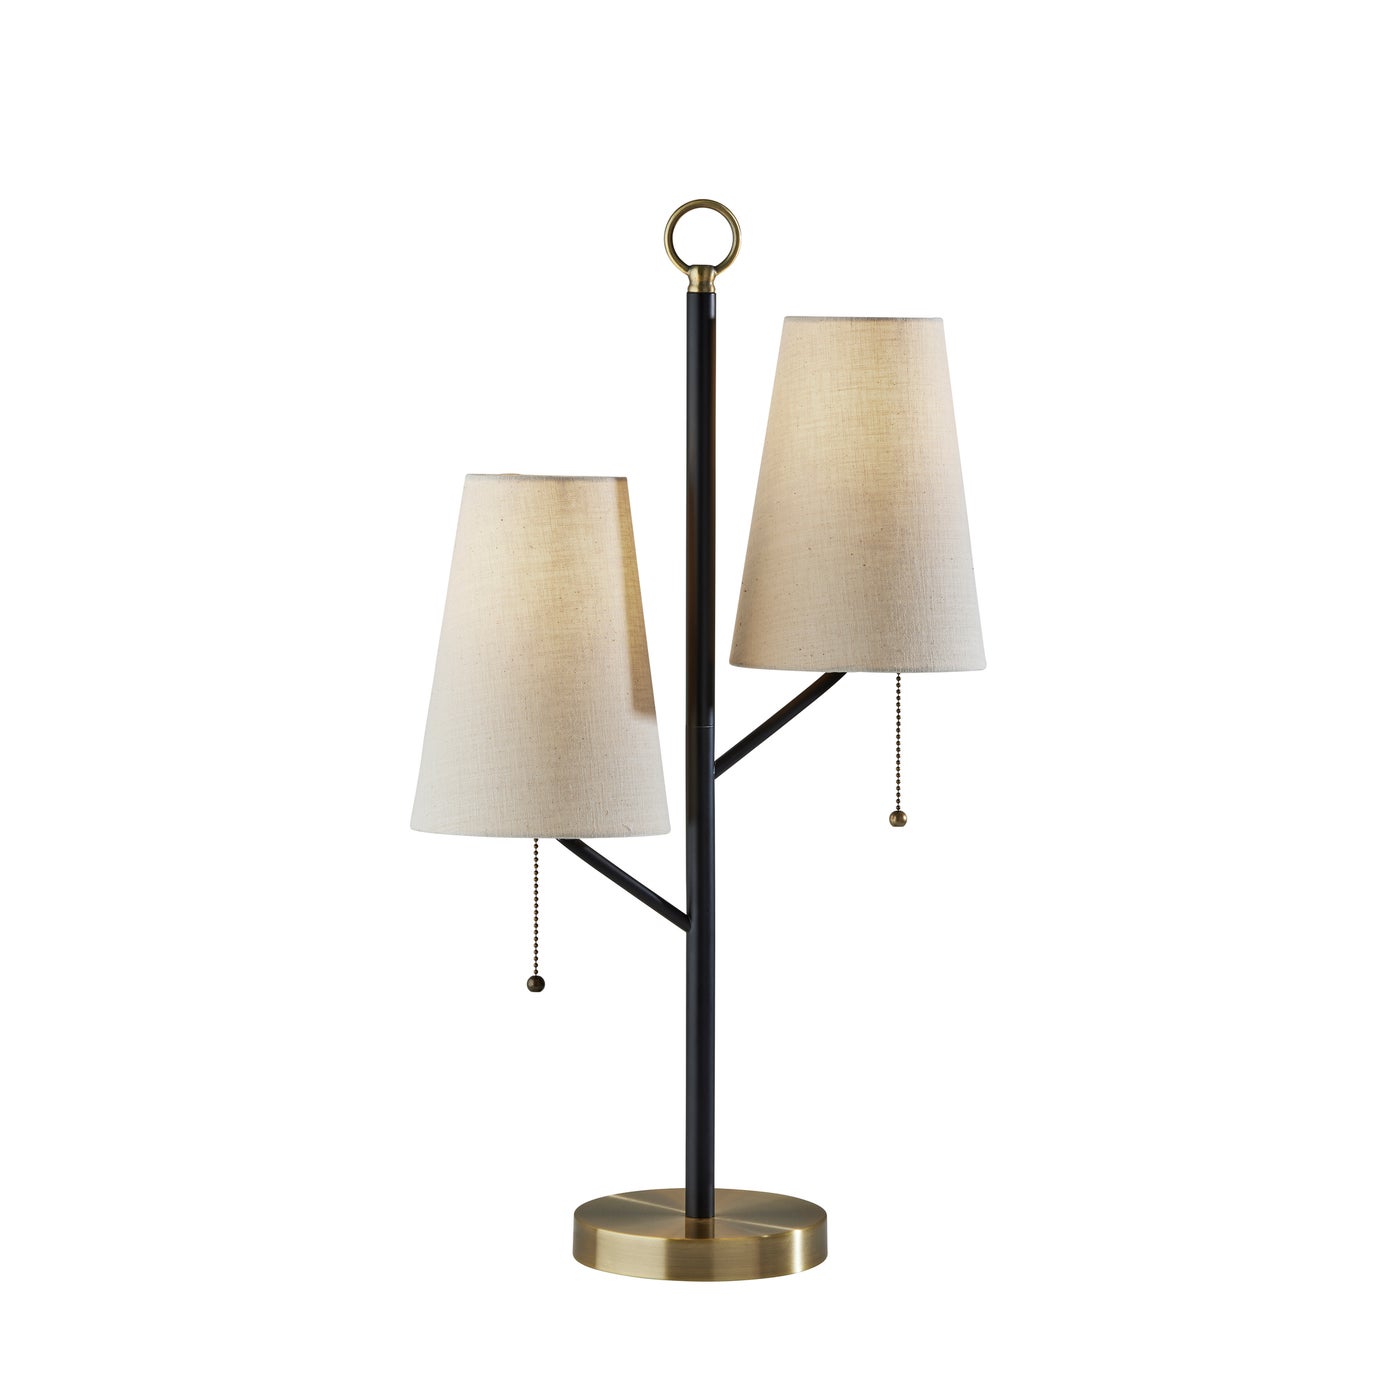 Adesso Home - 4175-01 - Two Light Table Lamp - Daniel - Black W. Antique Brass Accents